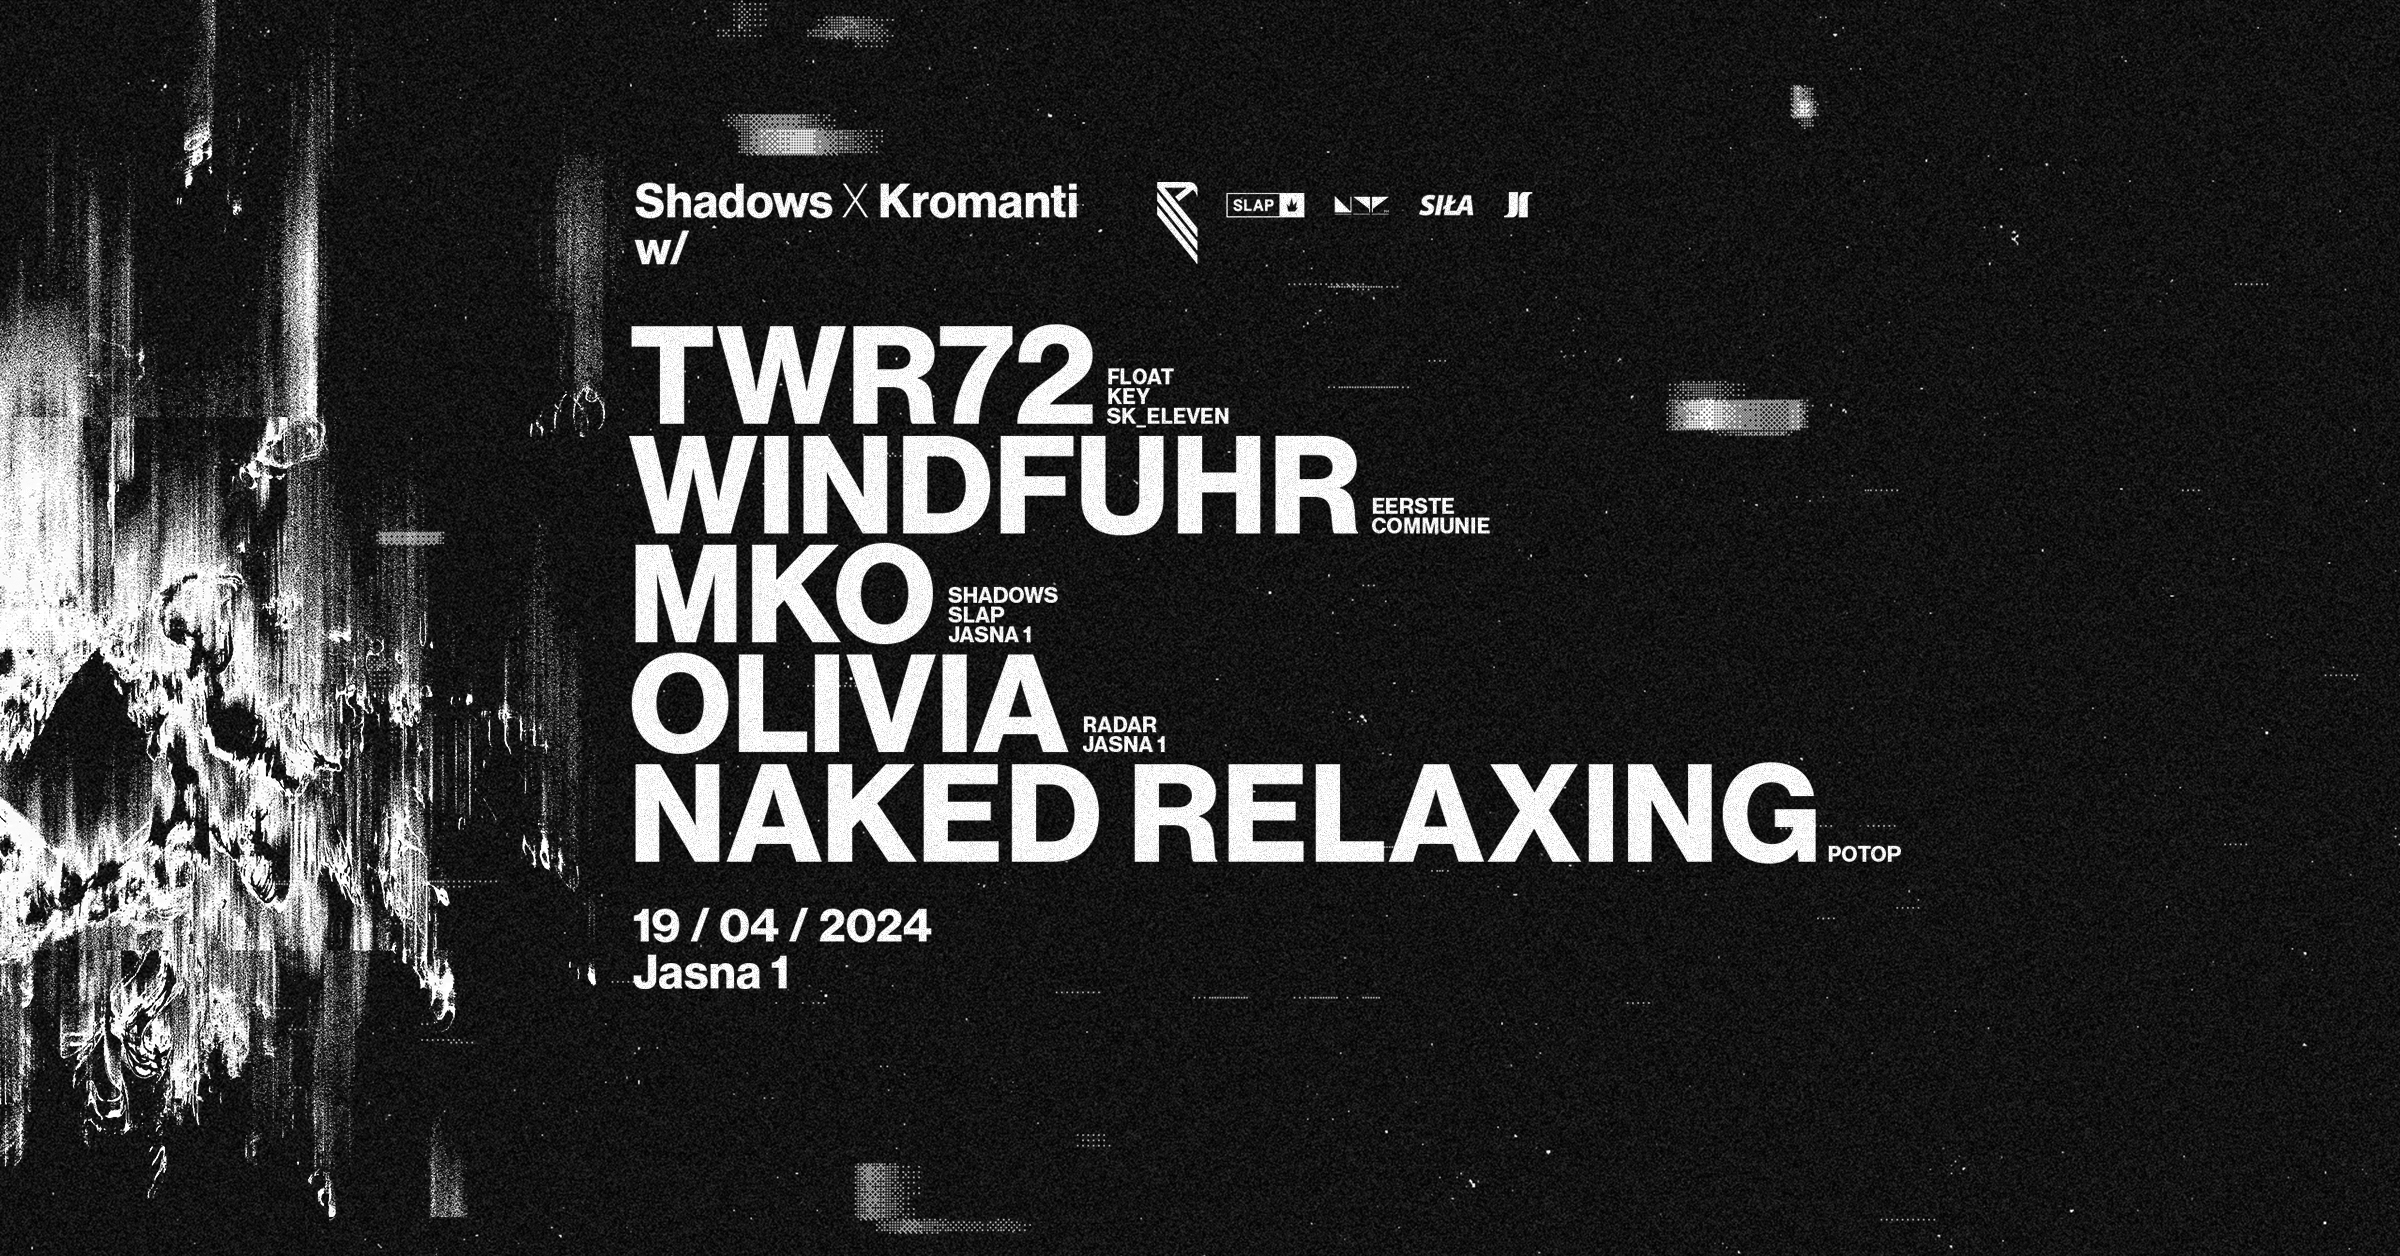 J1 - Shadows x Kromanti: TWR72, WINDFUHR, MKO / Olivia, naked relaxing - Página frontal